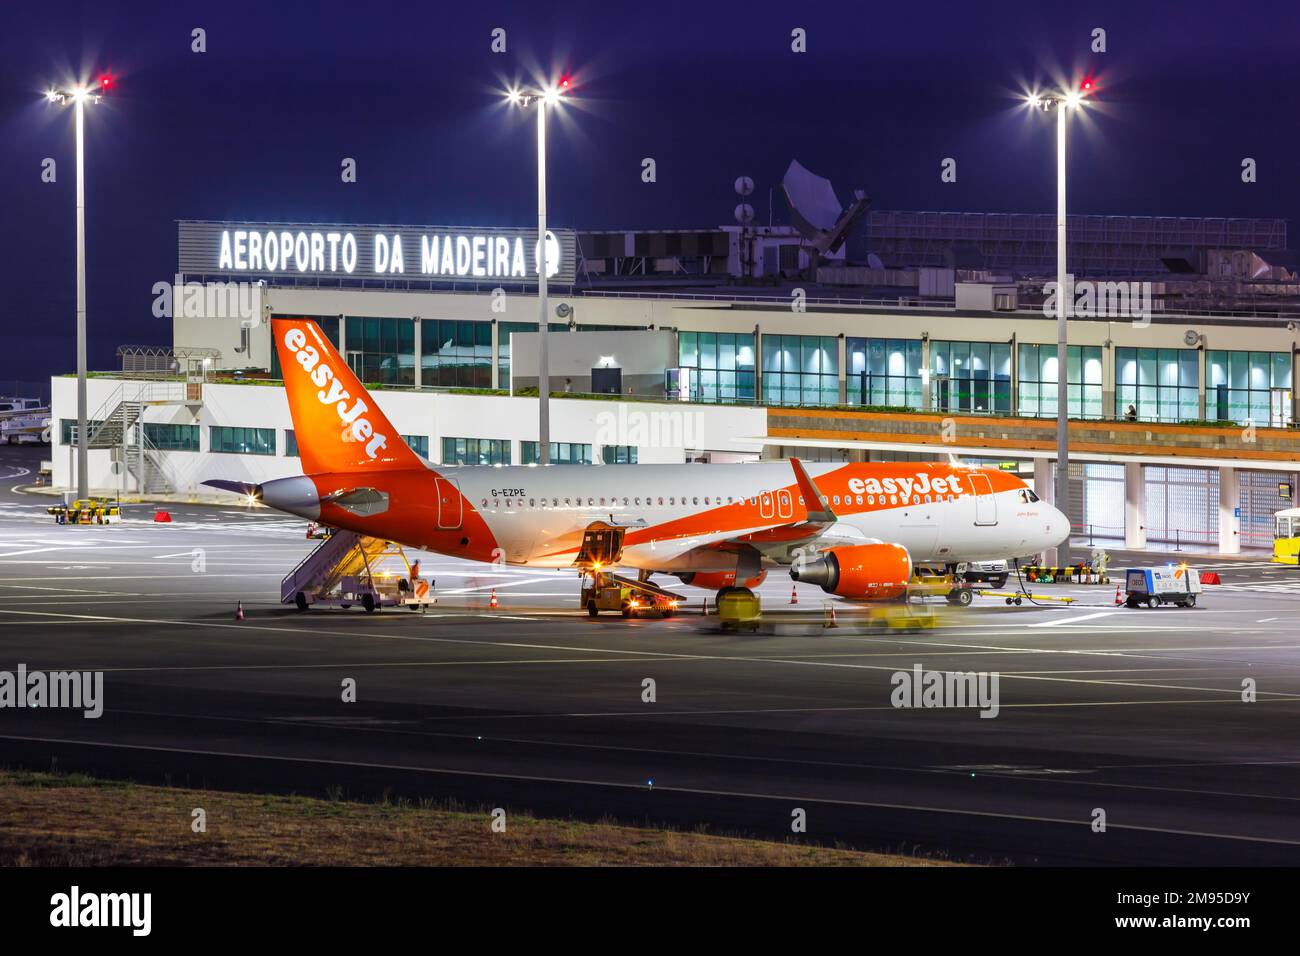 Funchal, Portugal - September 12, 2022: EasyJet Airbus A320 airplane at Funchal airport (FNC) in Portugal. Stock Photo